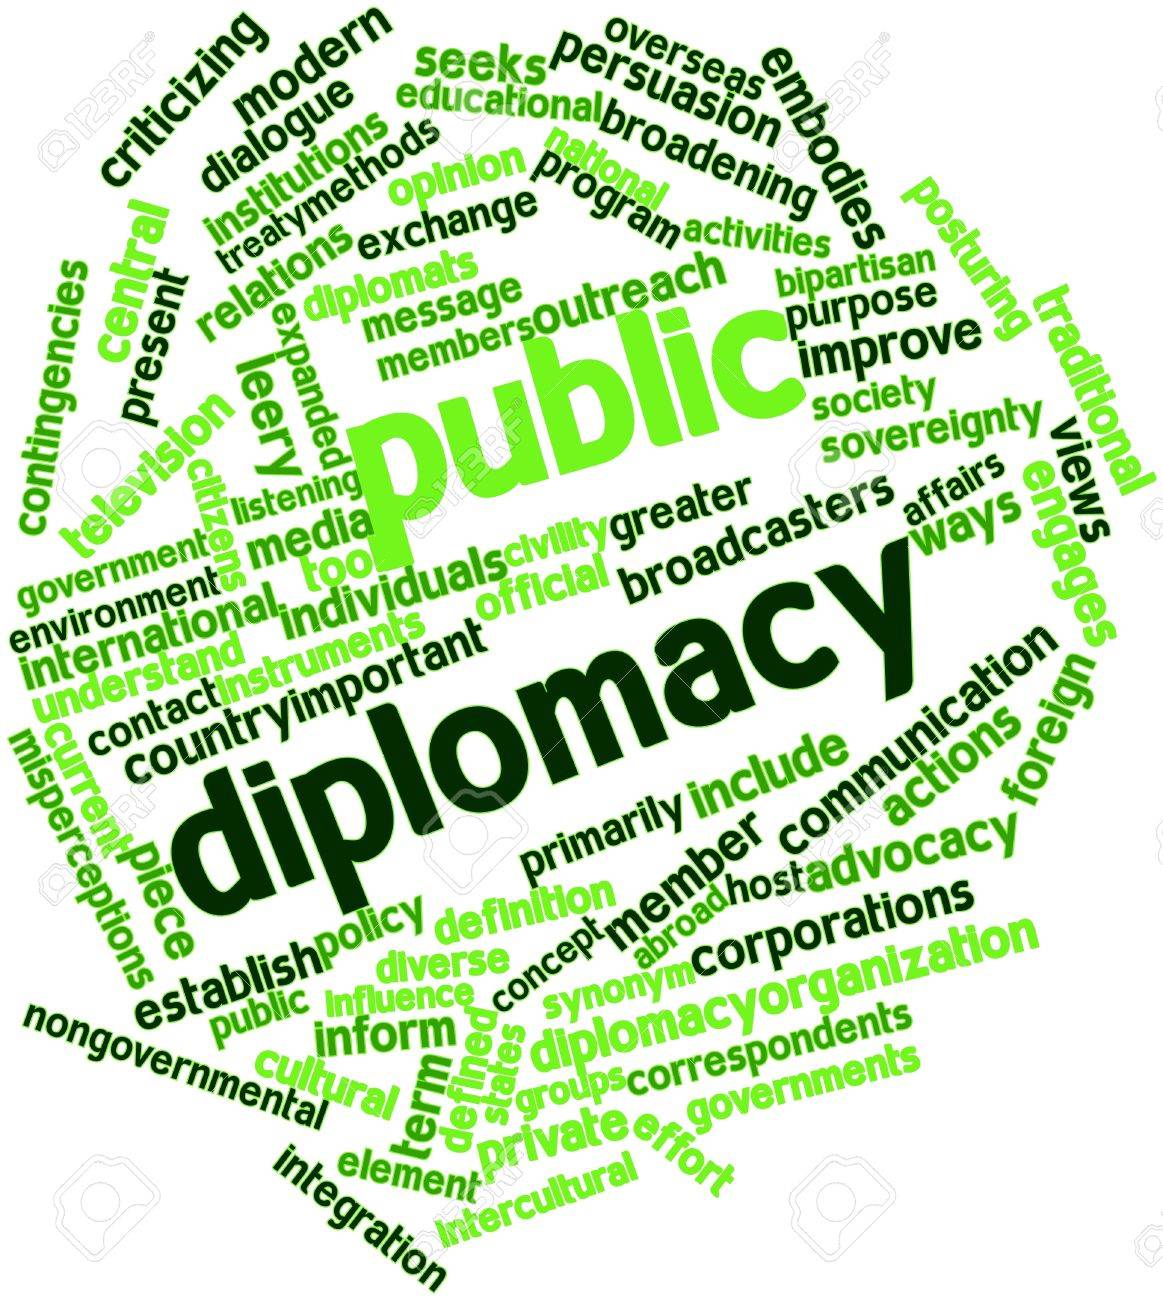 17352267-abstract-word-cloud-for-public-diplomacy-with-related-tags-and-terms.jpg